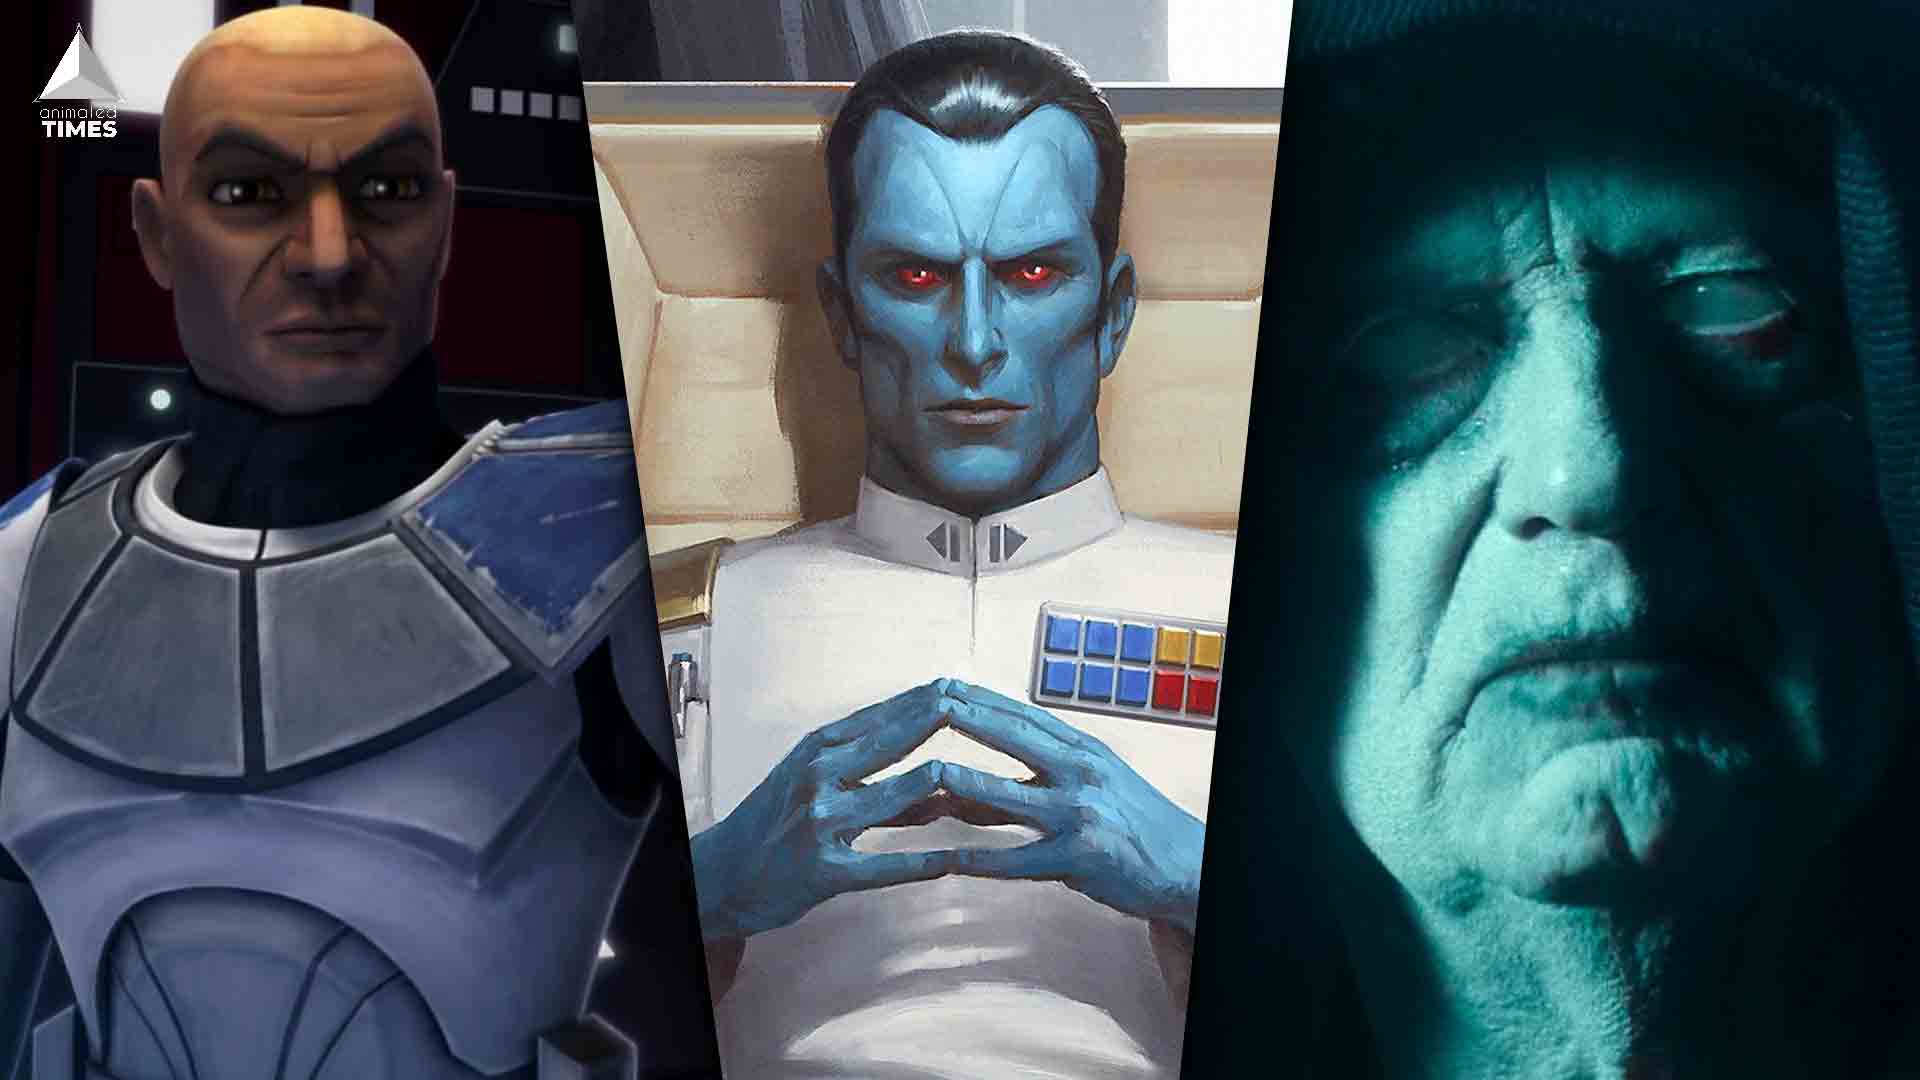 Star wars: Top 10 clones that shaped the Star wars history